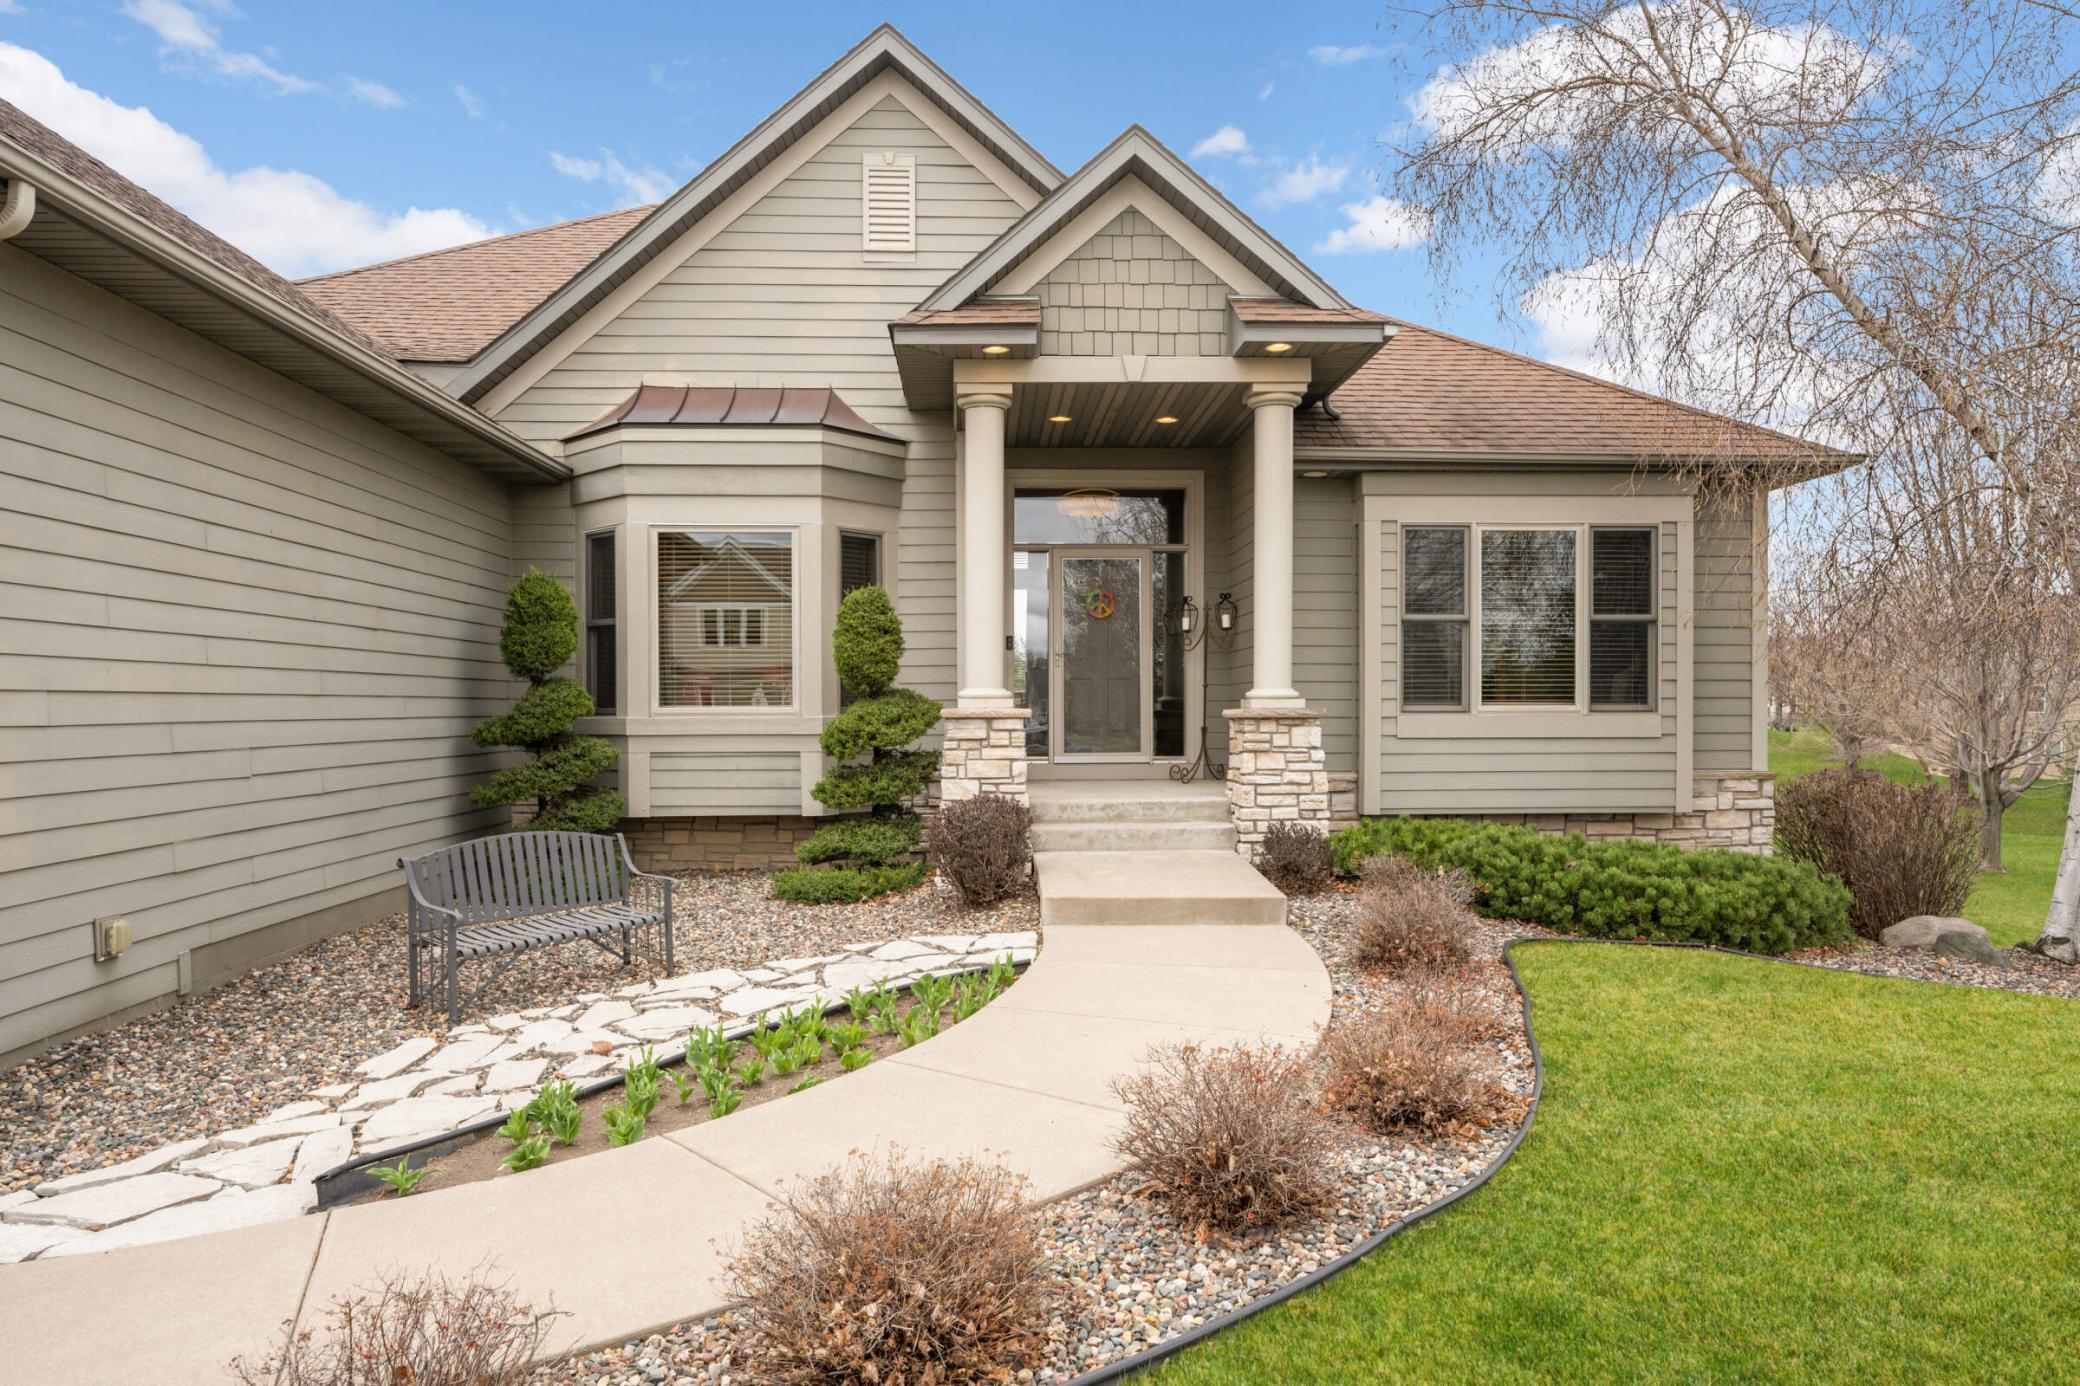 Stunning curb appeal welcomes your guests